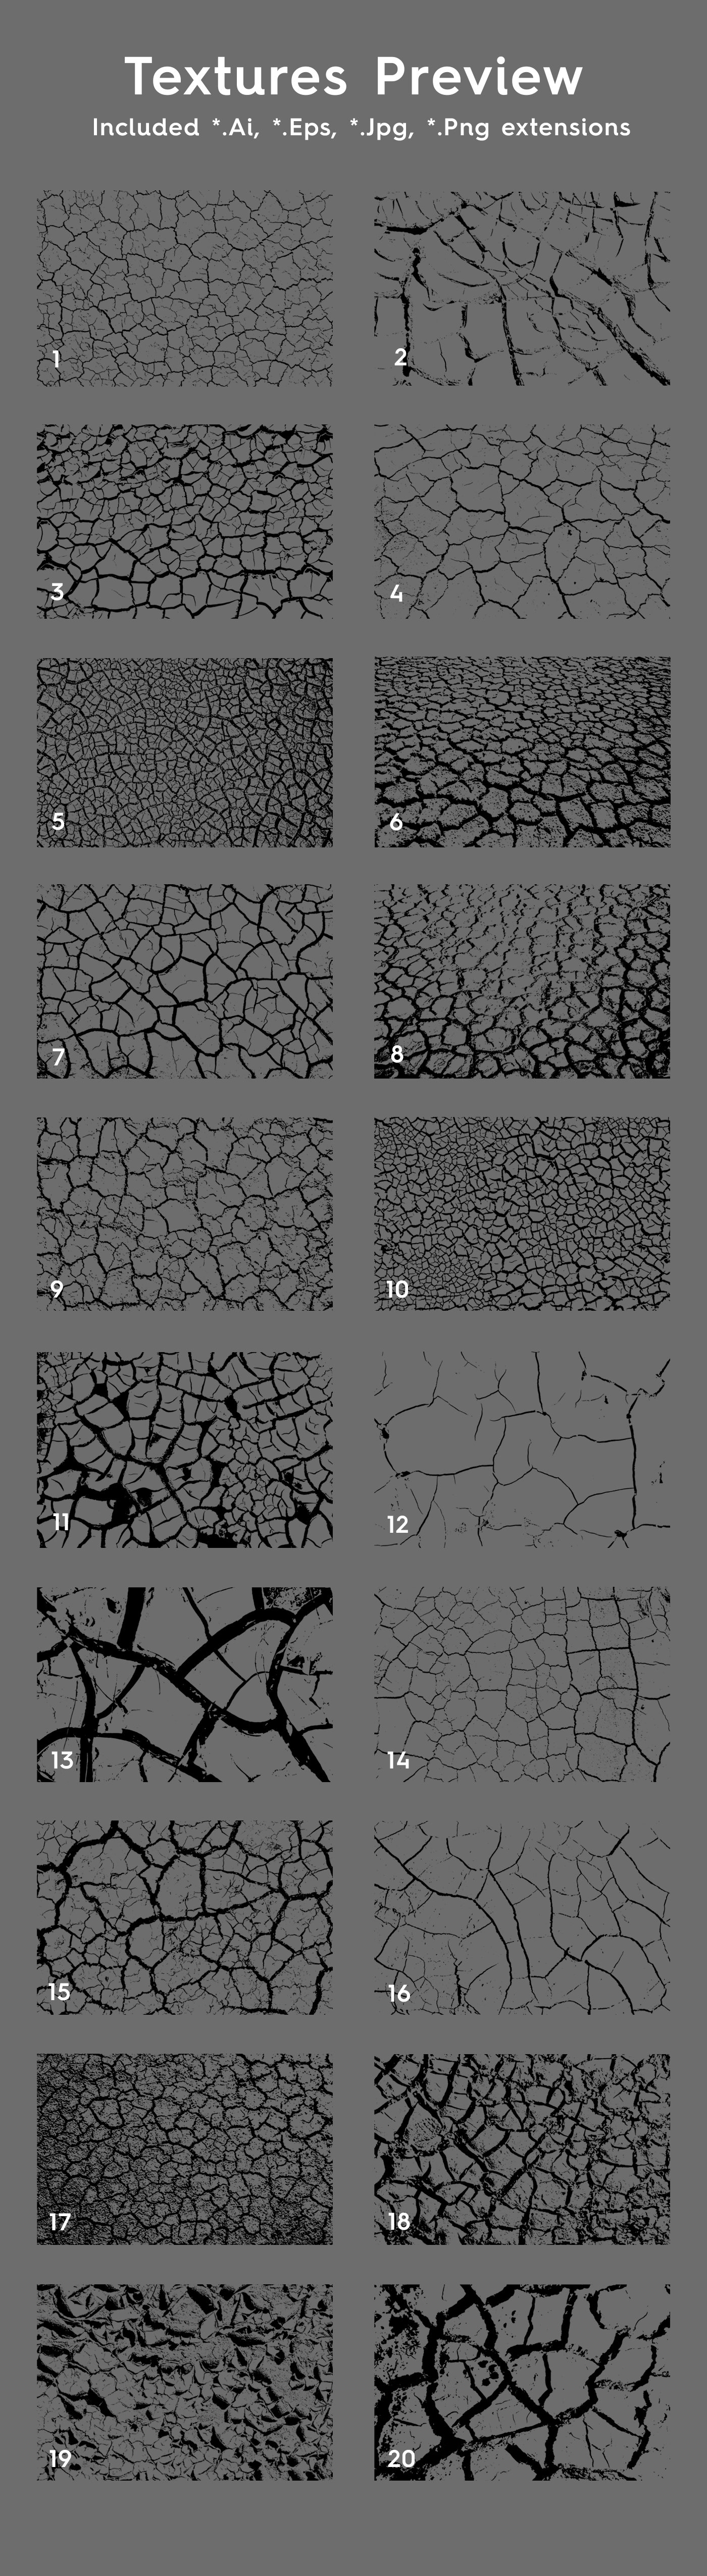 20 cracked dirt and soil texture overlays textures preview 853